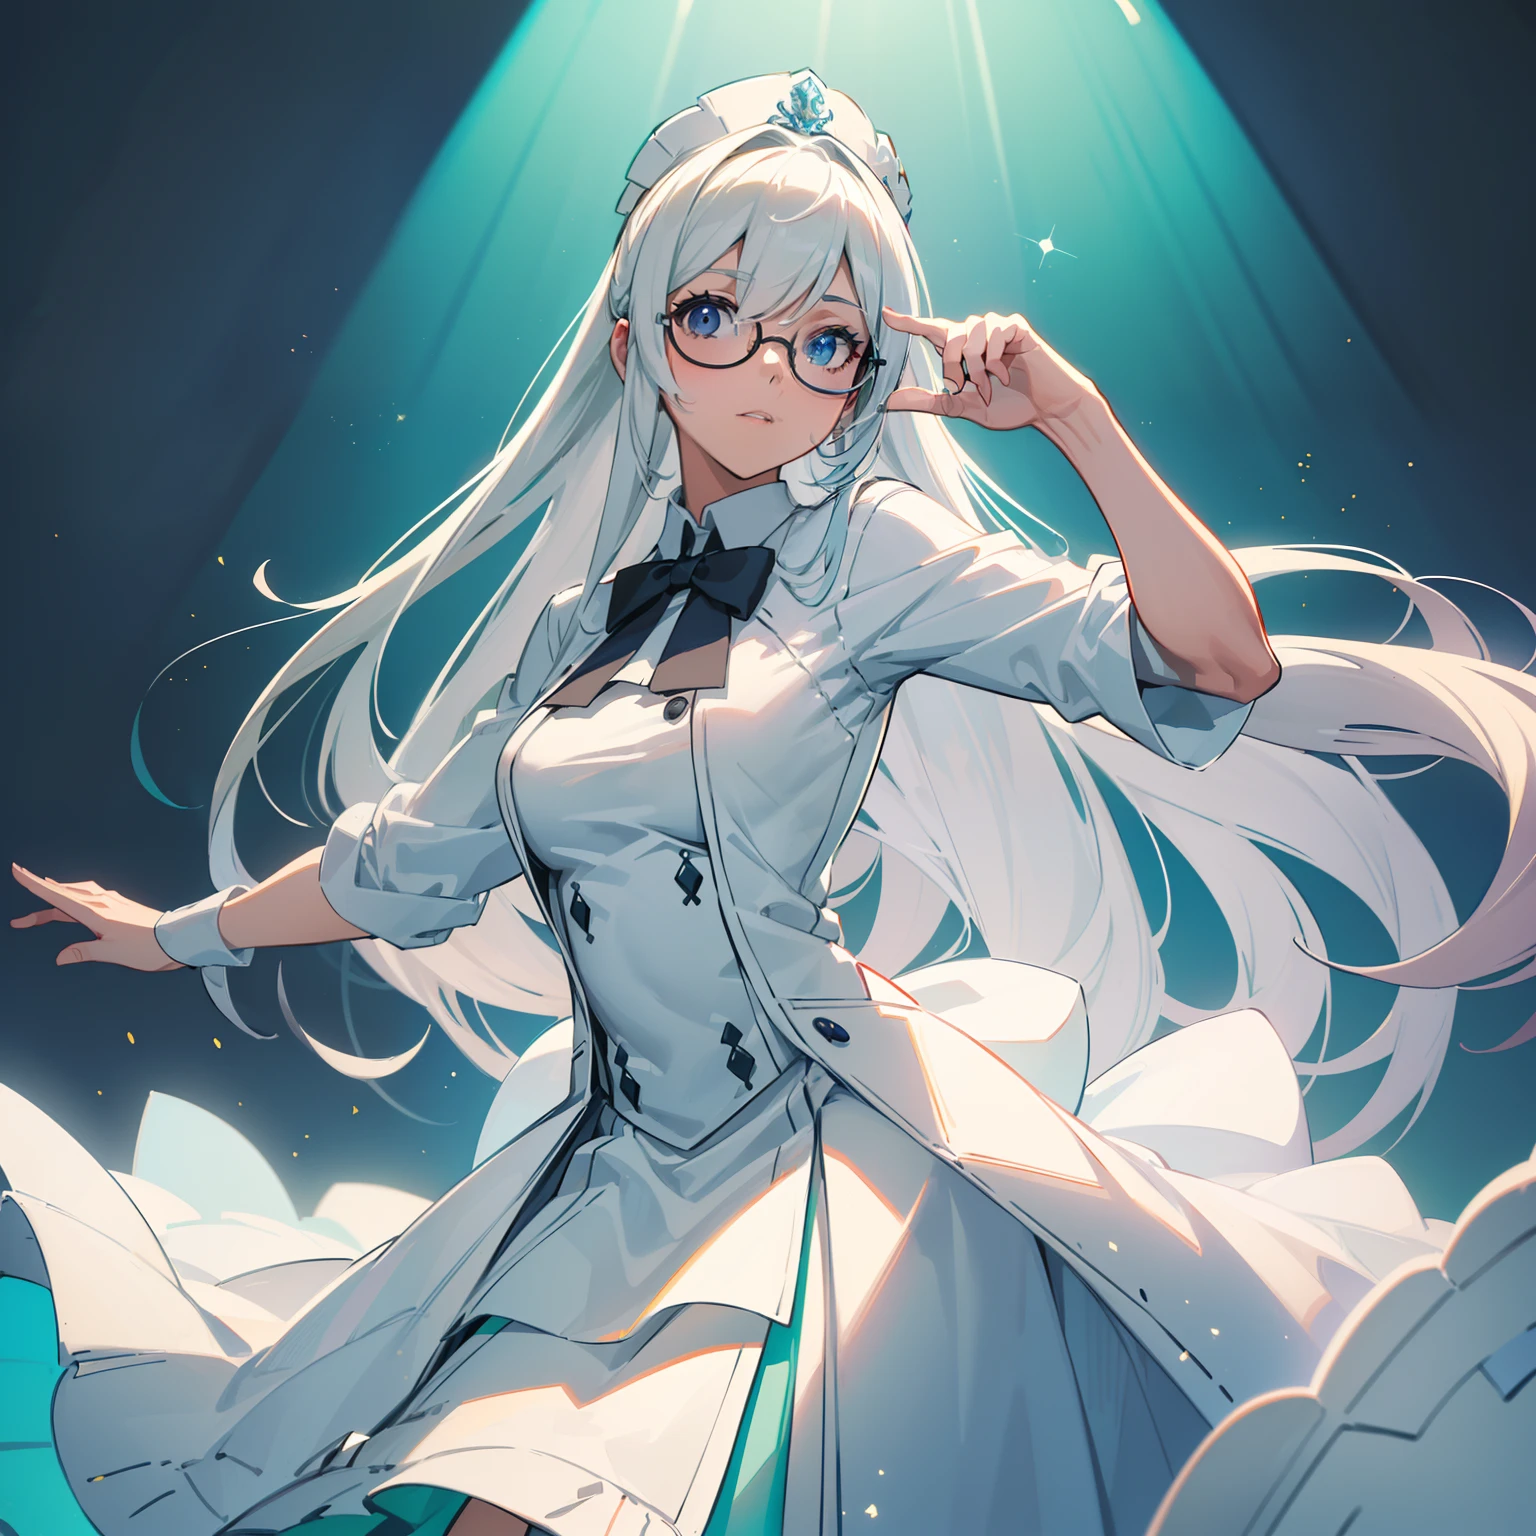 (nobleman, young white suit, white top hat, Stylish glasses, holding cane face, tax poses, Looking Sideways), (soft lighting), (style of cartoon:1.1), (best quality, high resolution), (アニメ), (Colouring, swirly vibrant colors), (studio lighting:1.2)